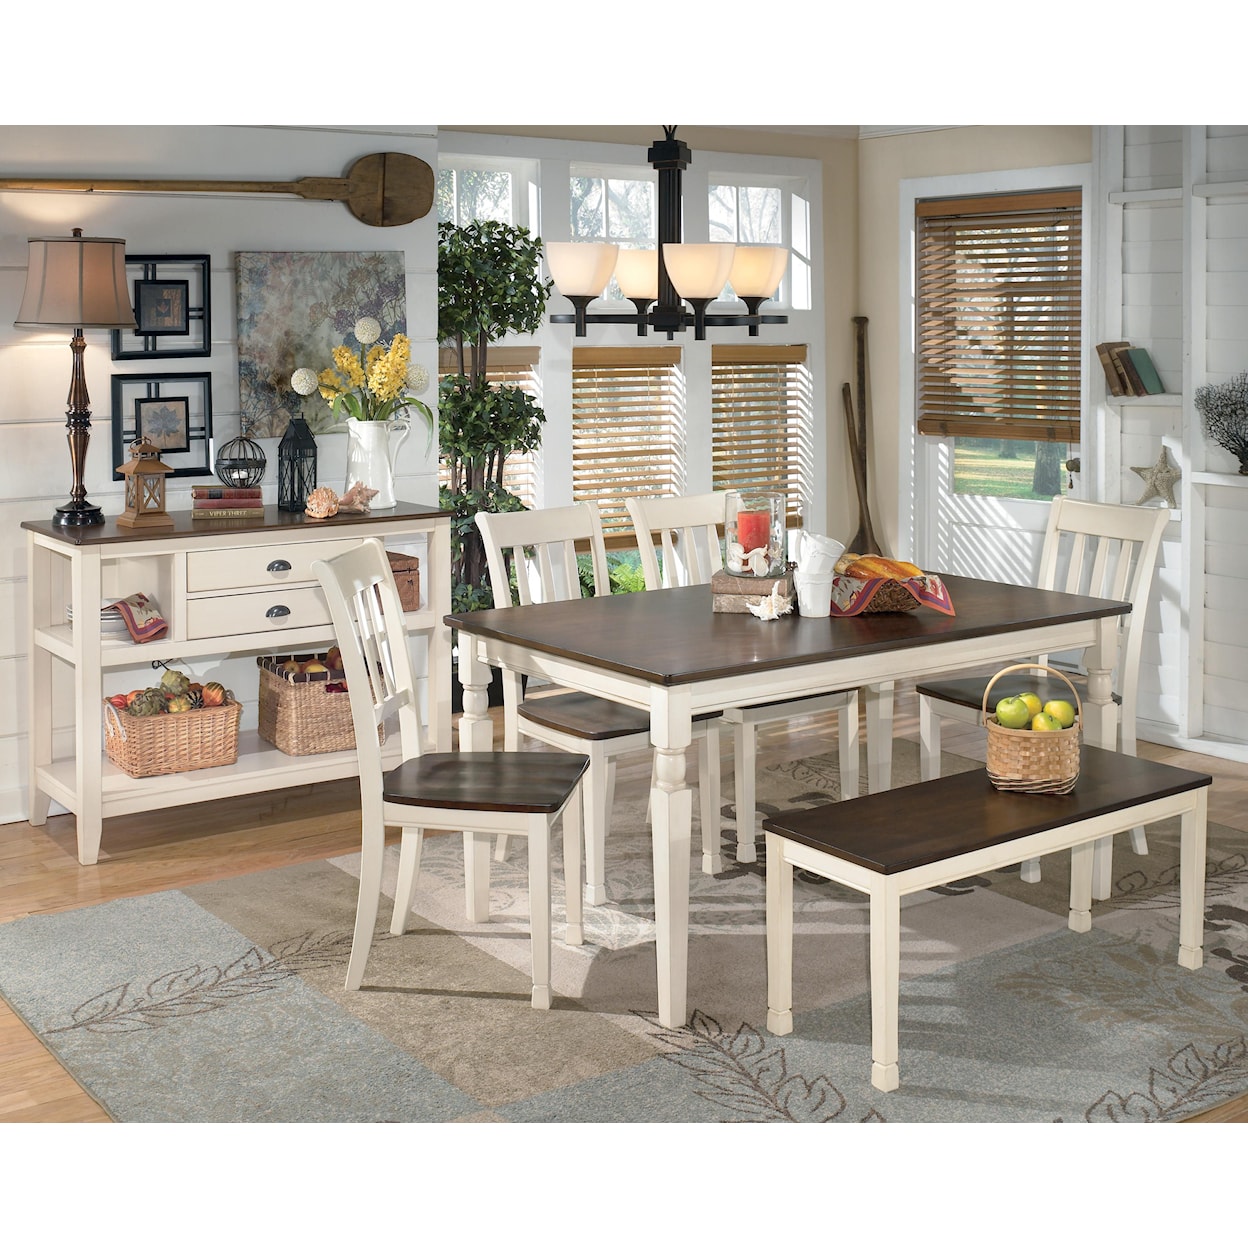 Signature Design by Ashley Whitesburg 6pc Dining Room Group